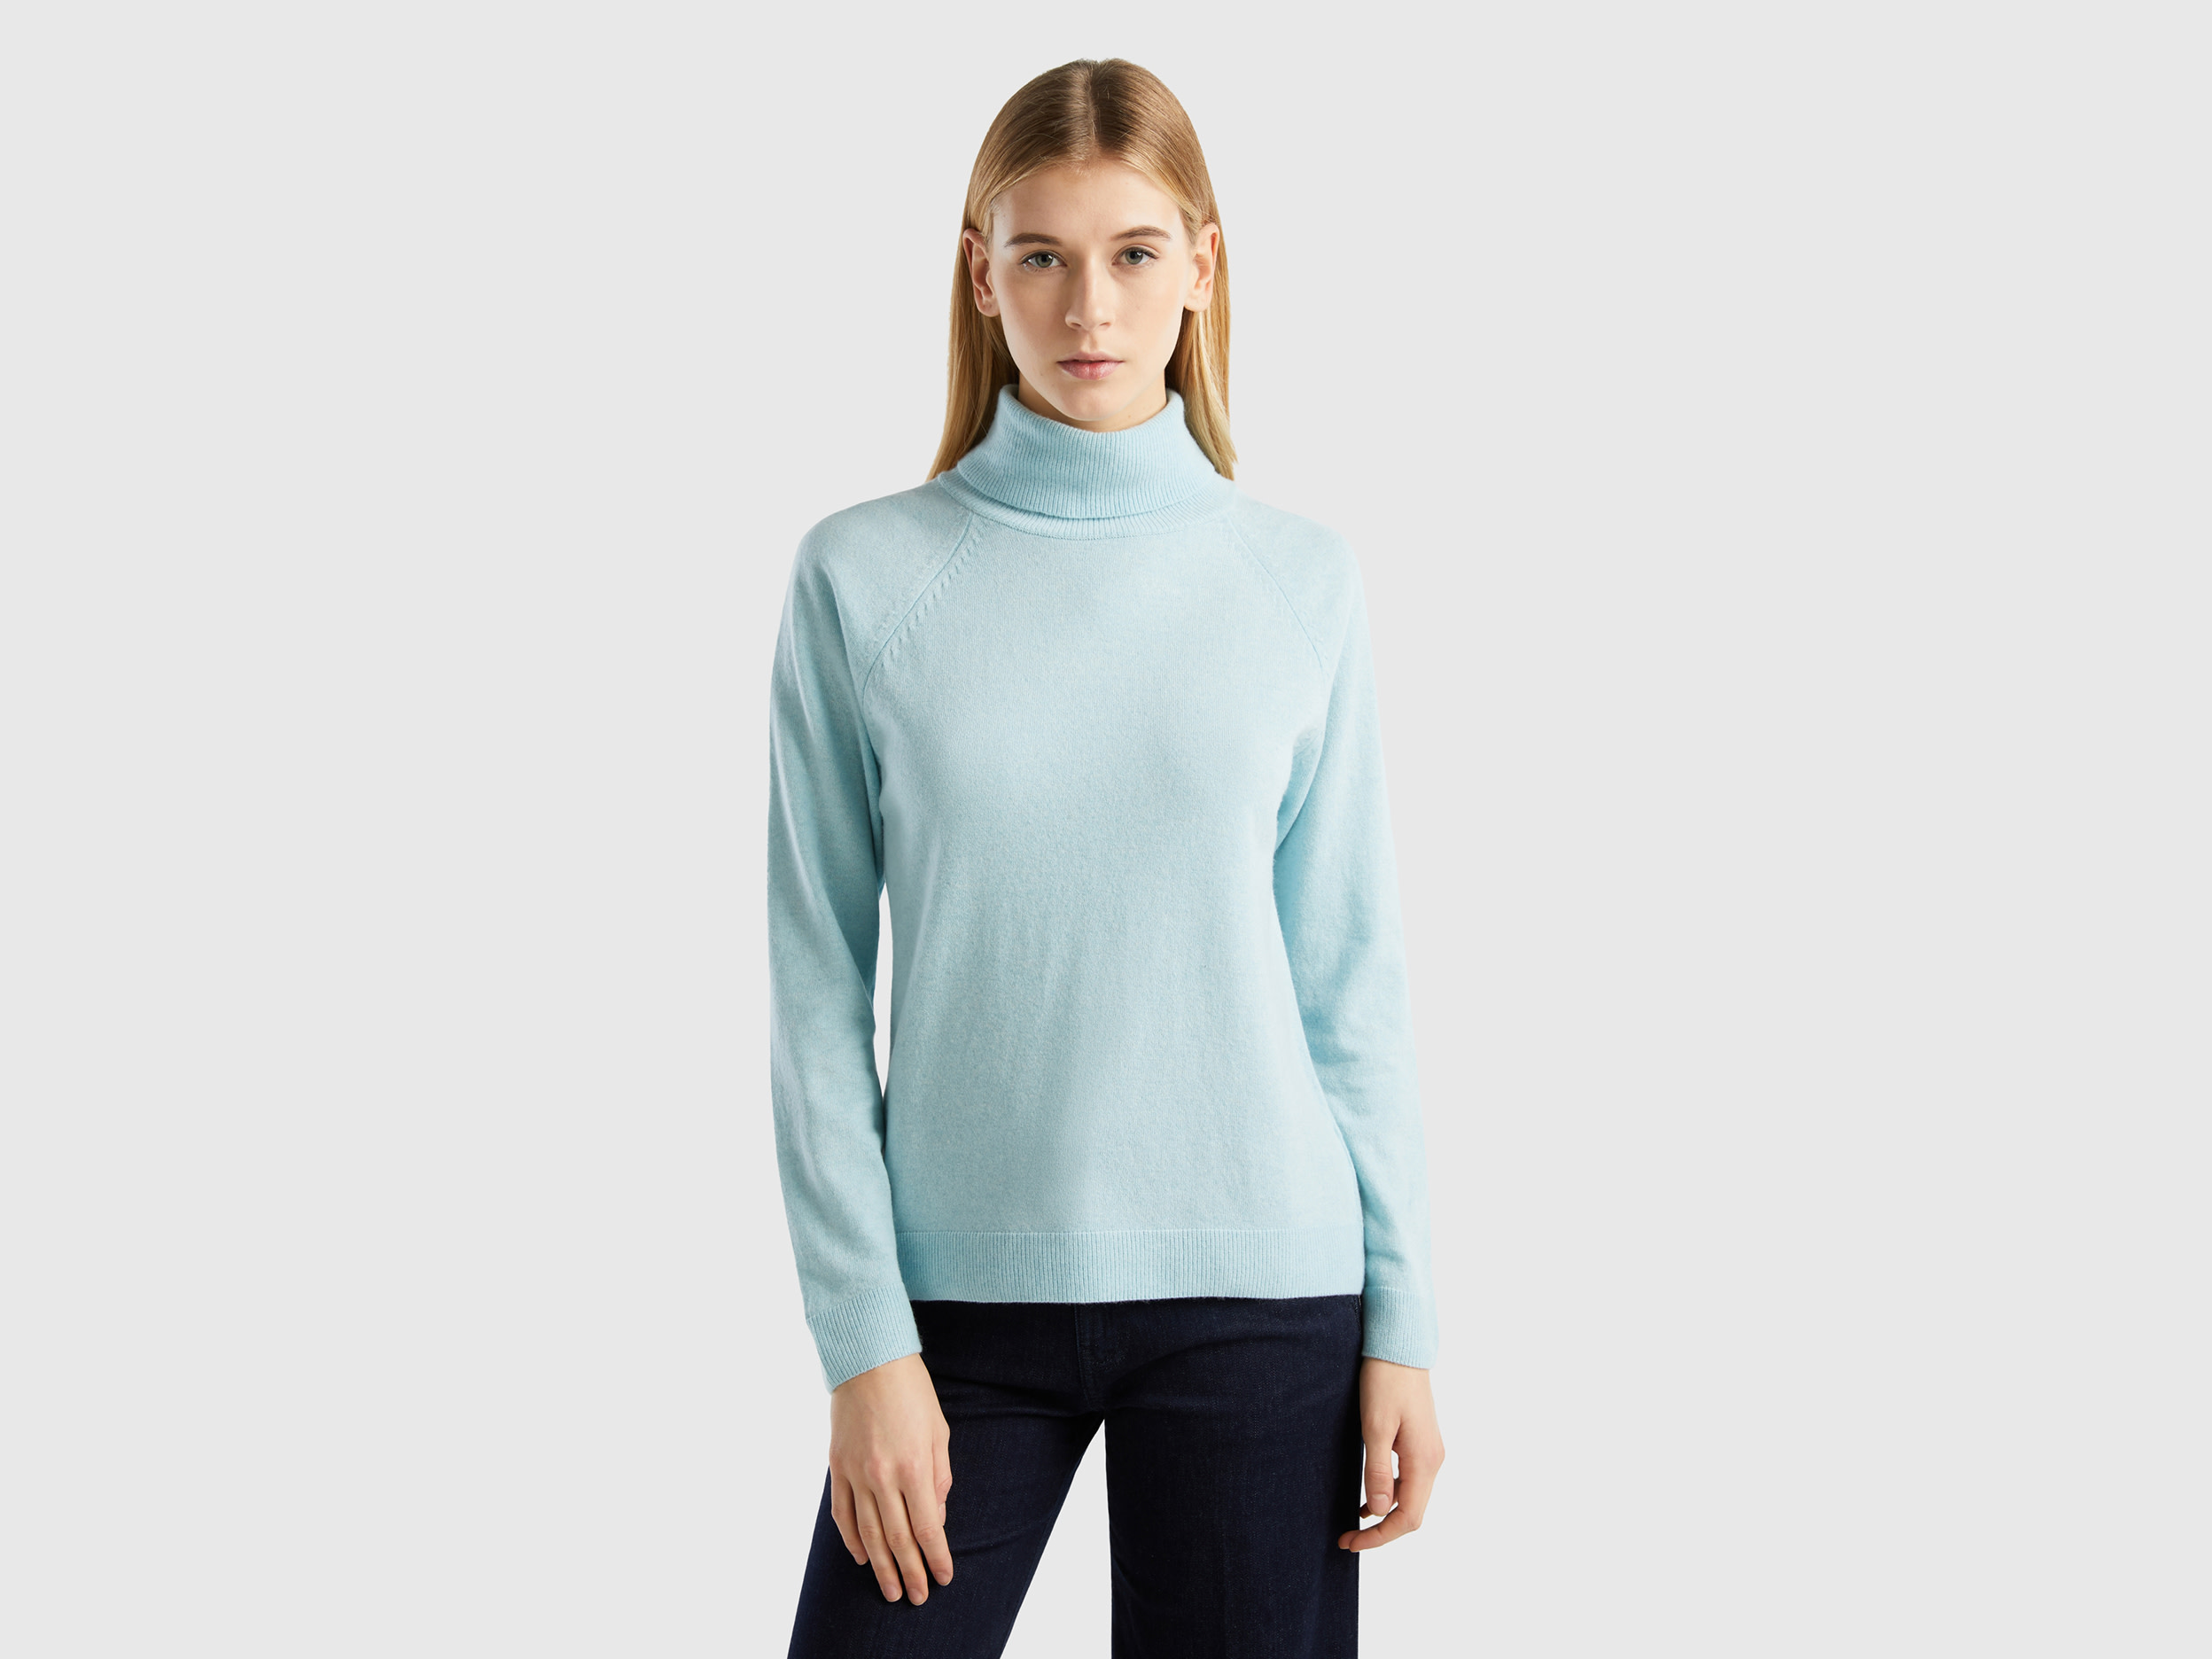 Benetton, Light Gray Turtleneck Sweater In Cashmere And Wool Blend, size M, Light Gray, Women